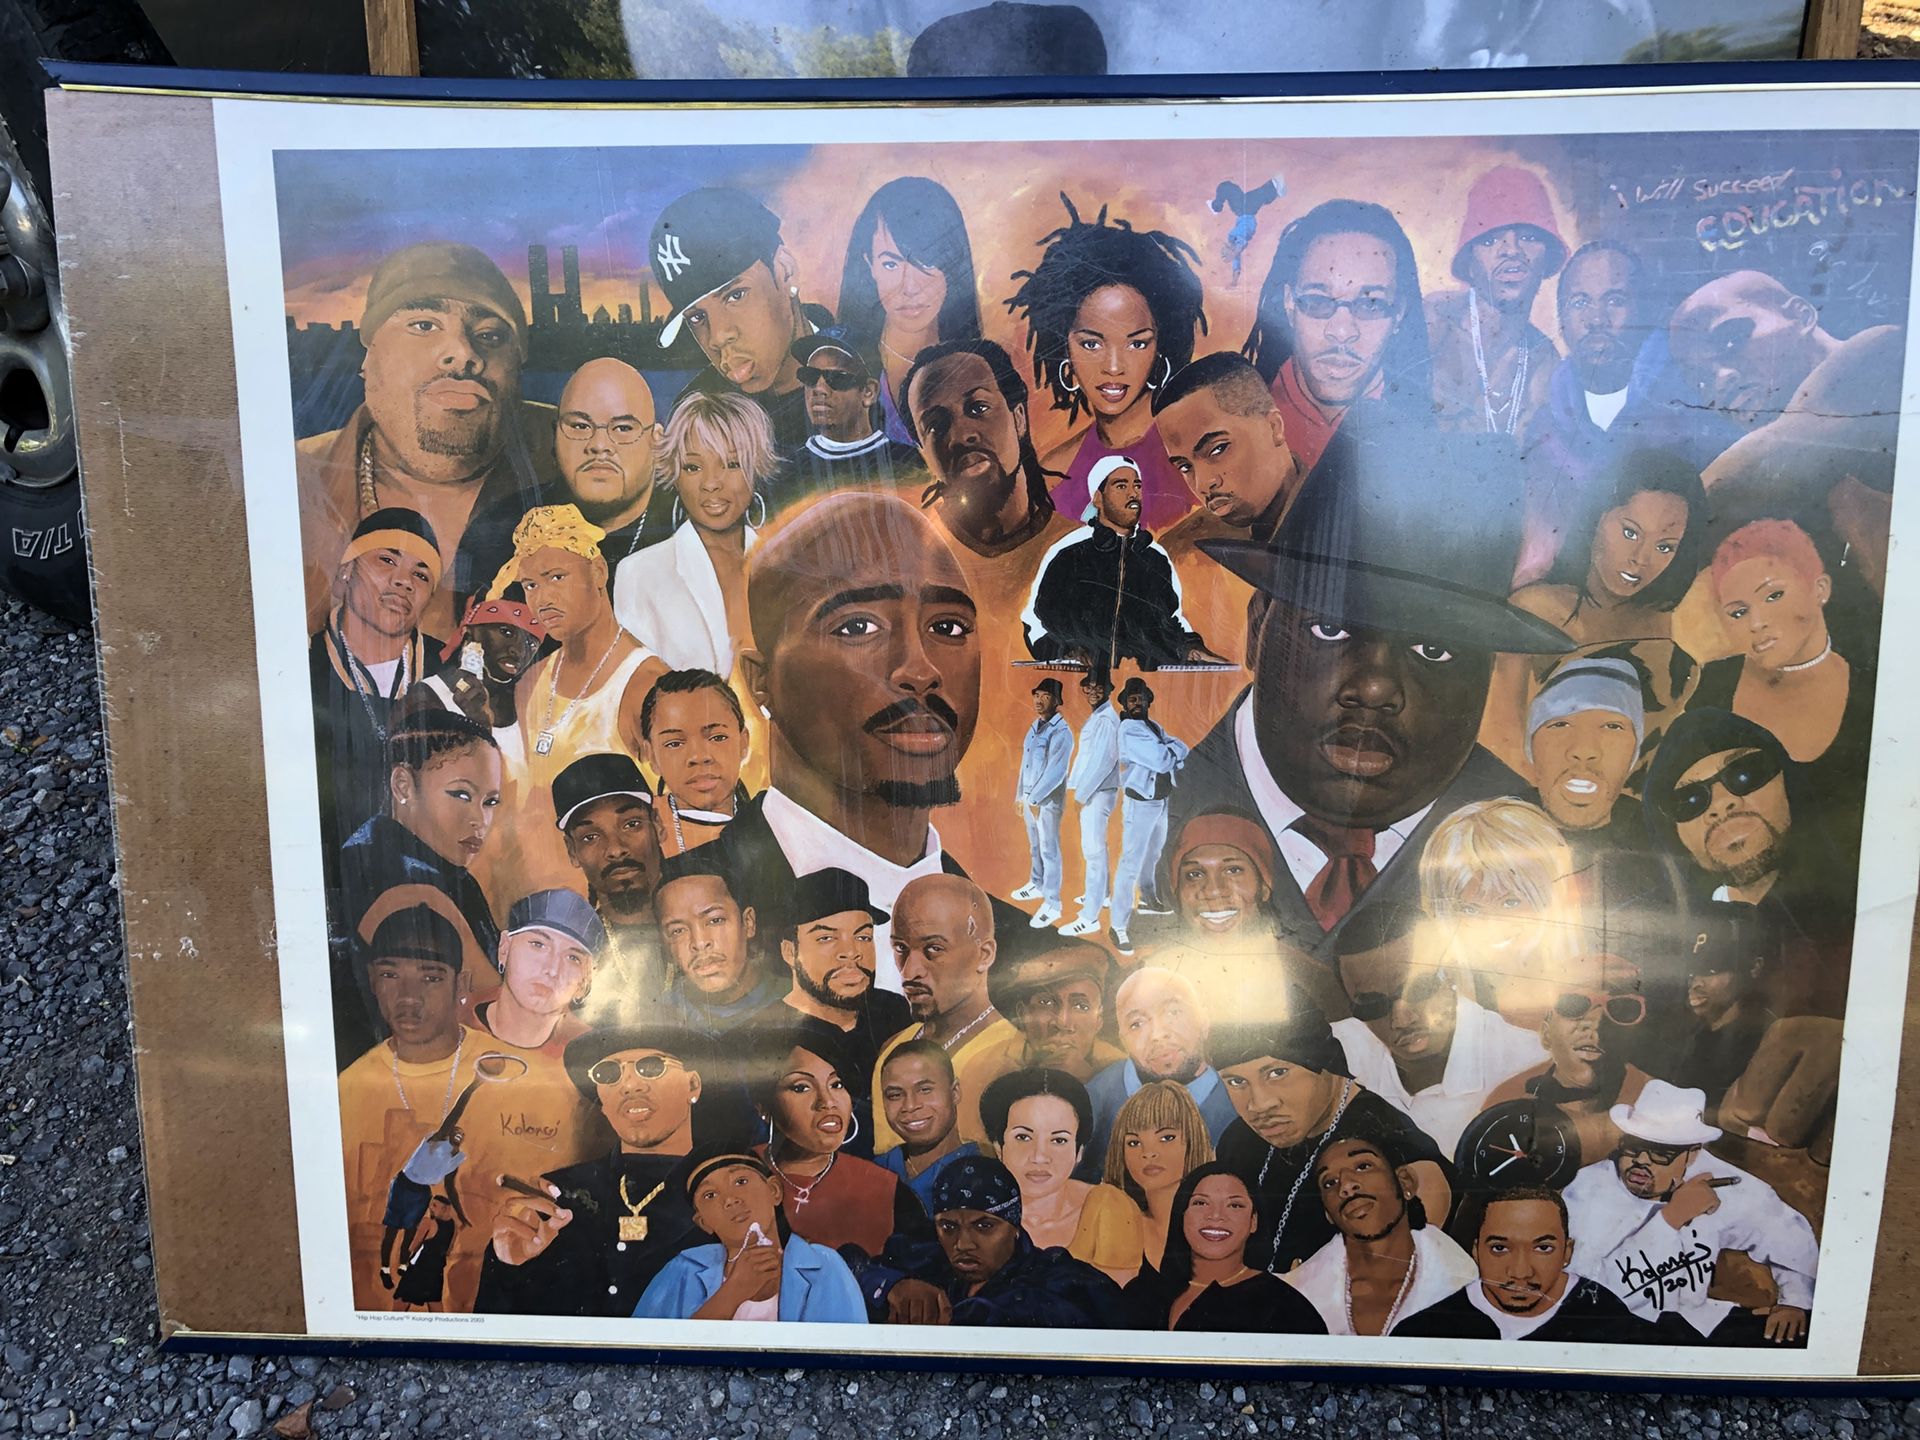 music memabilia pic is in great shape needs framed has all your favorite artists on it and it’s singed by some one on the bottom right